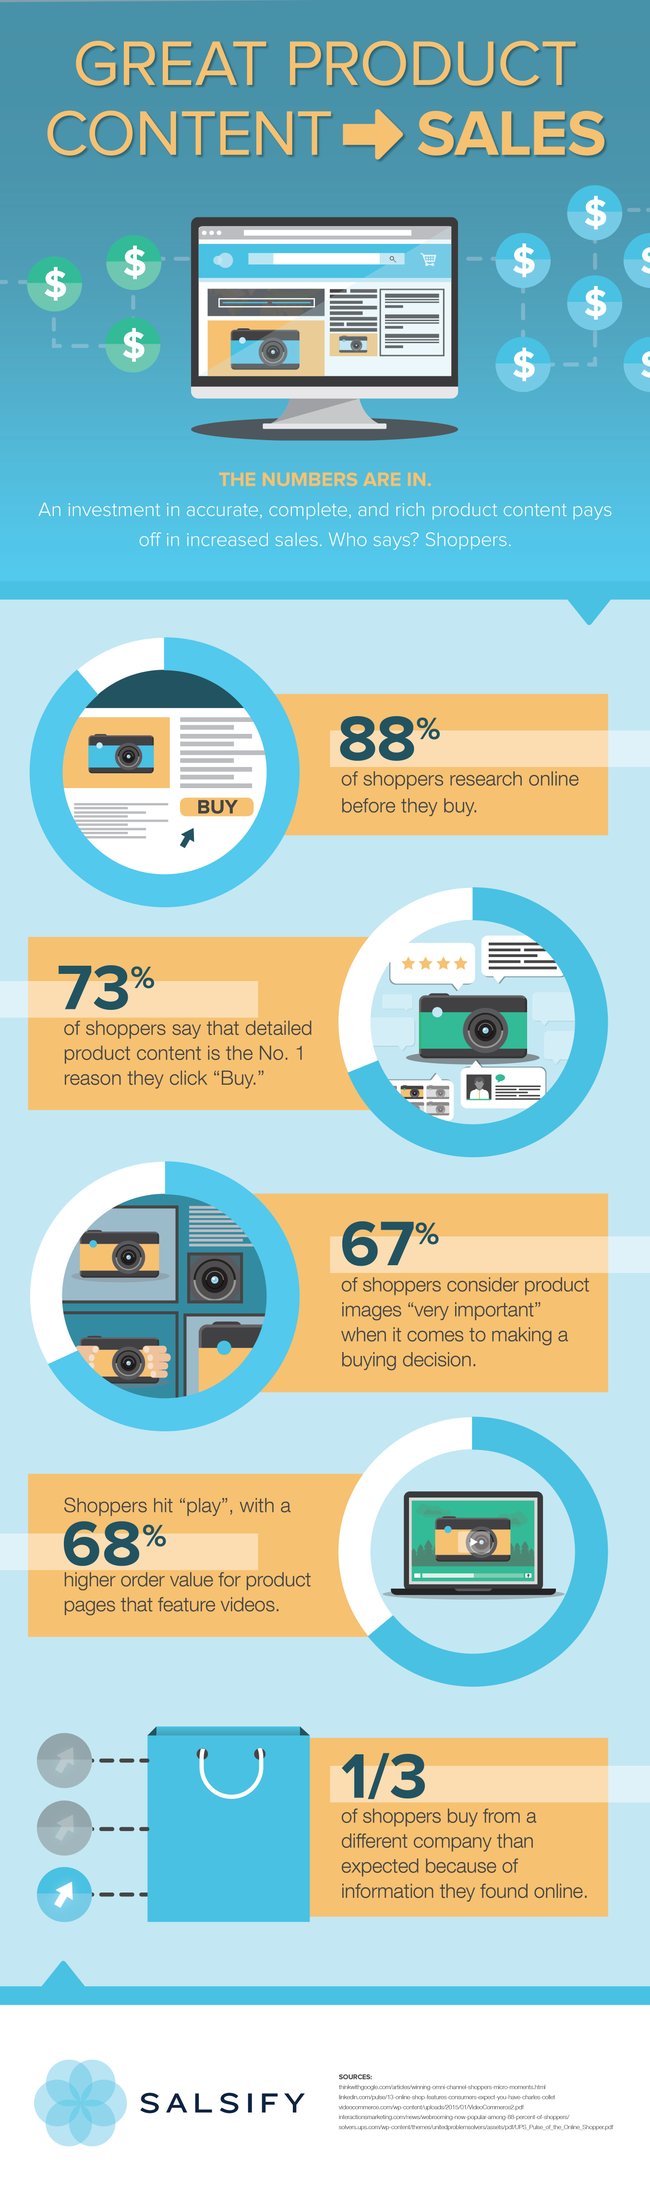 Great Product Content Drives Sales [Infographic]